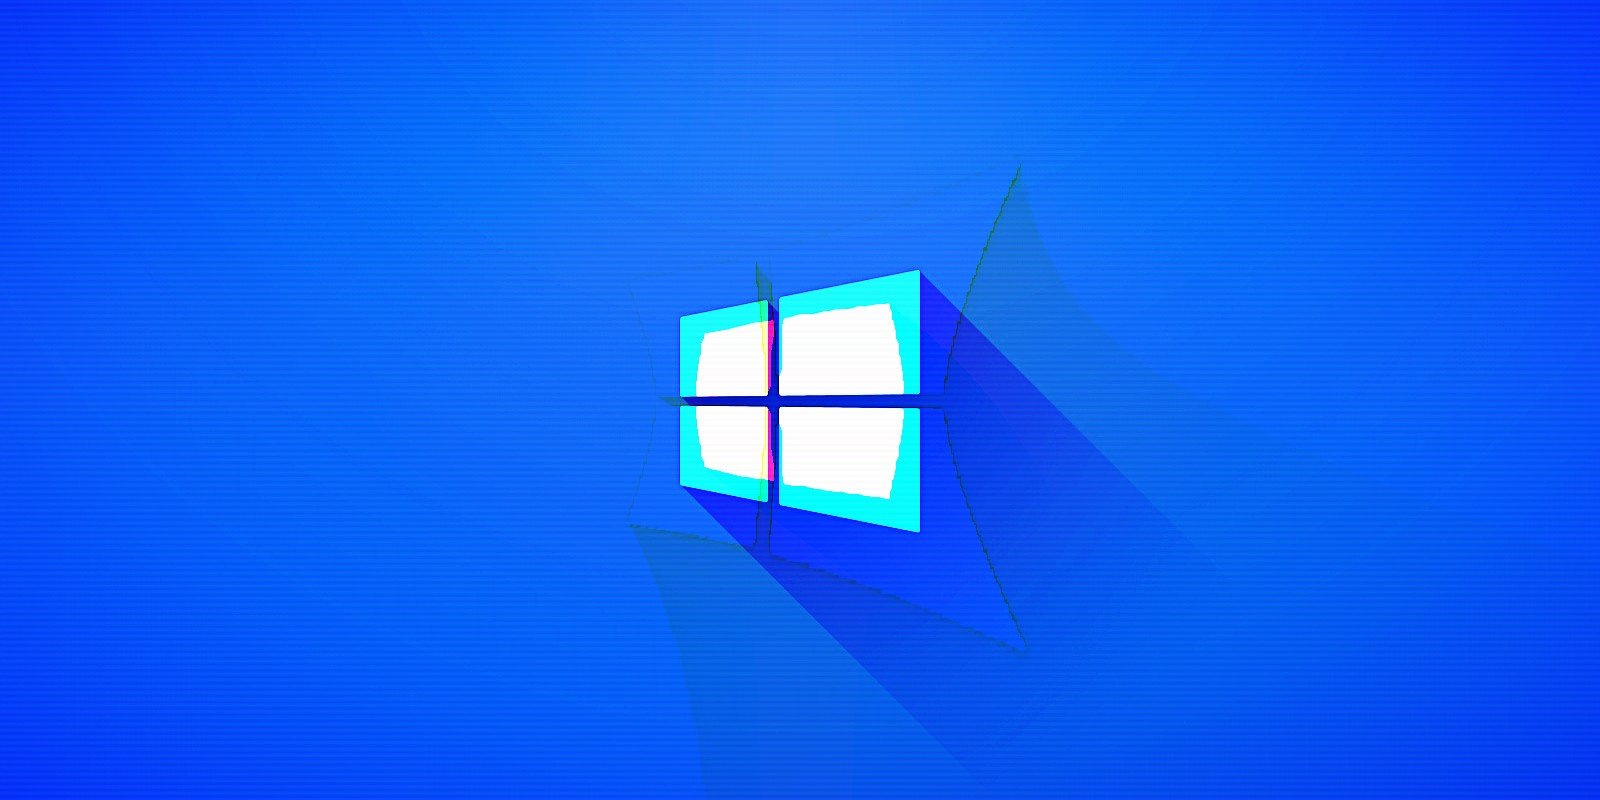 Microsoft releases Windows Package Manager 1.0. at Build 2021